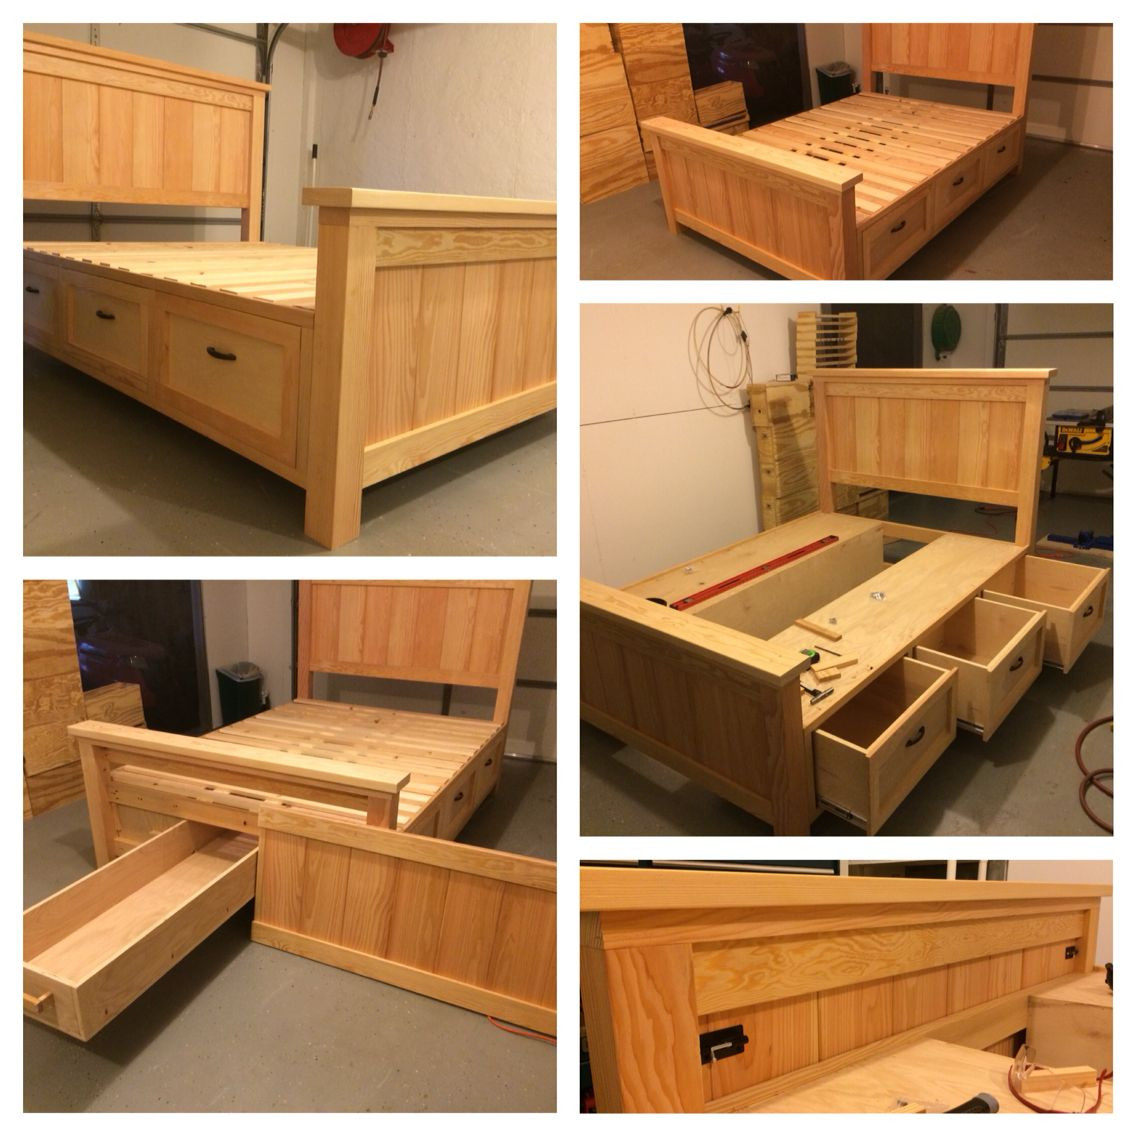 DIY Kids Bed With Storage
 I just finished this build It is a Queen Farmhouse